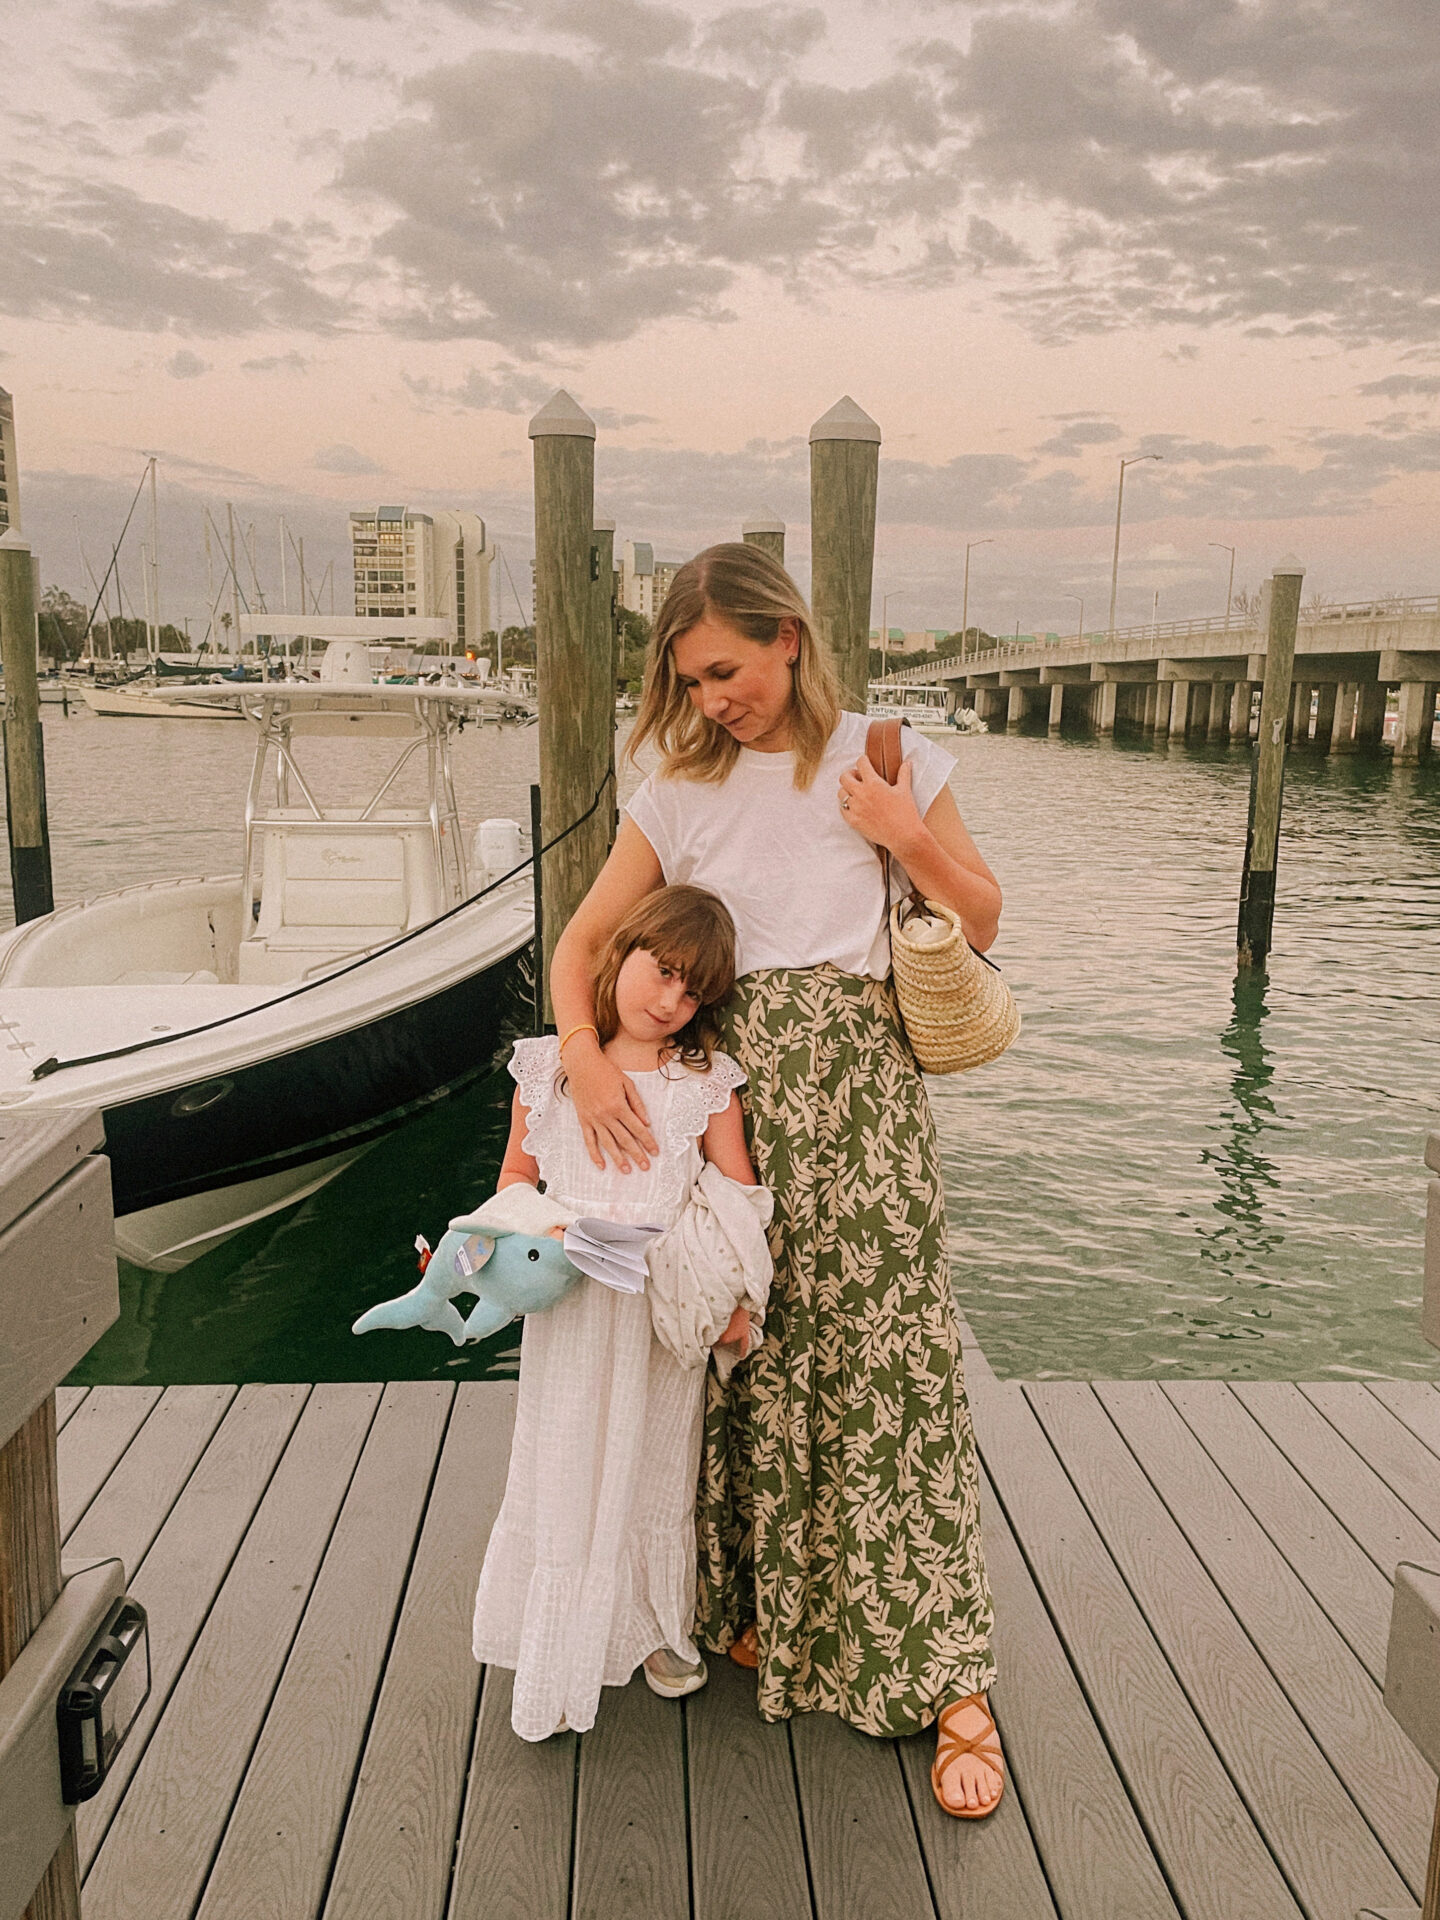 Karin Emily wears resort wear: a long green maxi skirt, a perfect white tee, and brown lace up sandals next to her daughter who's wearing a maxi length white lace dress